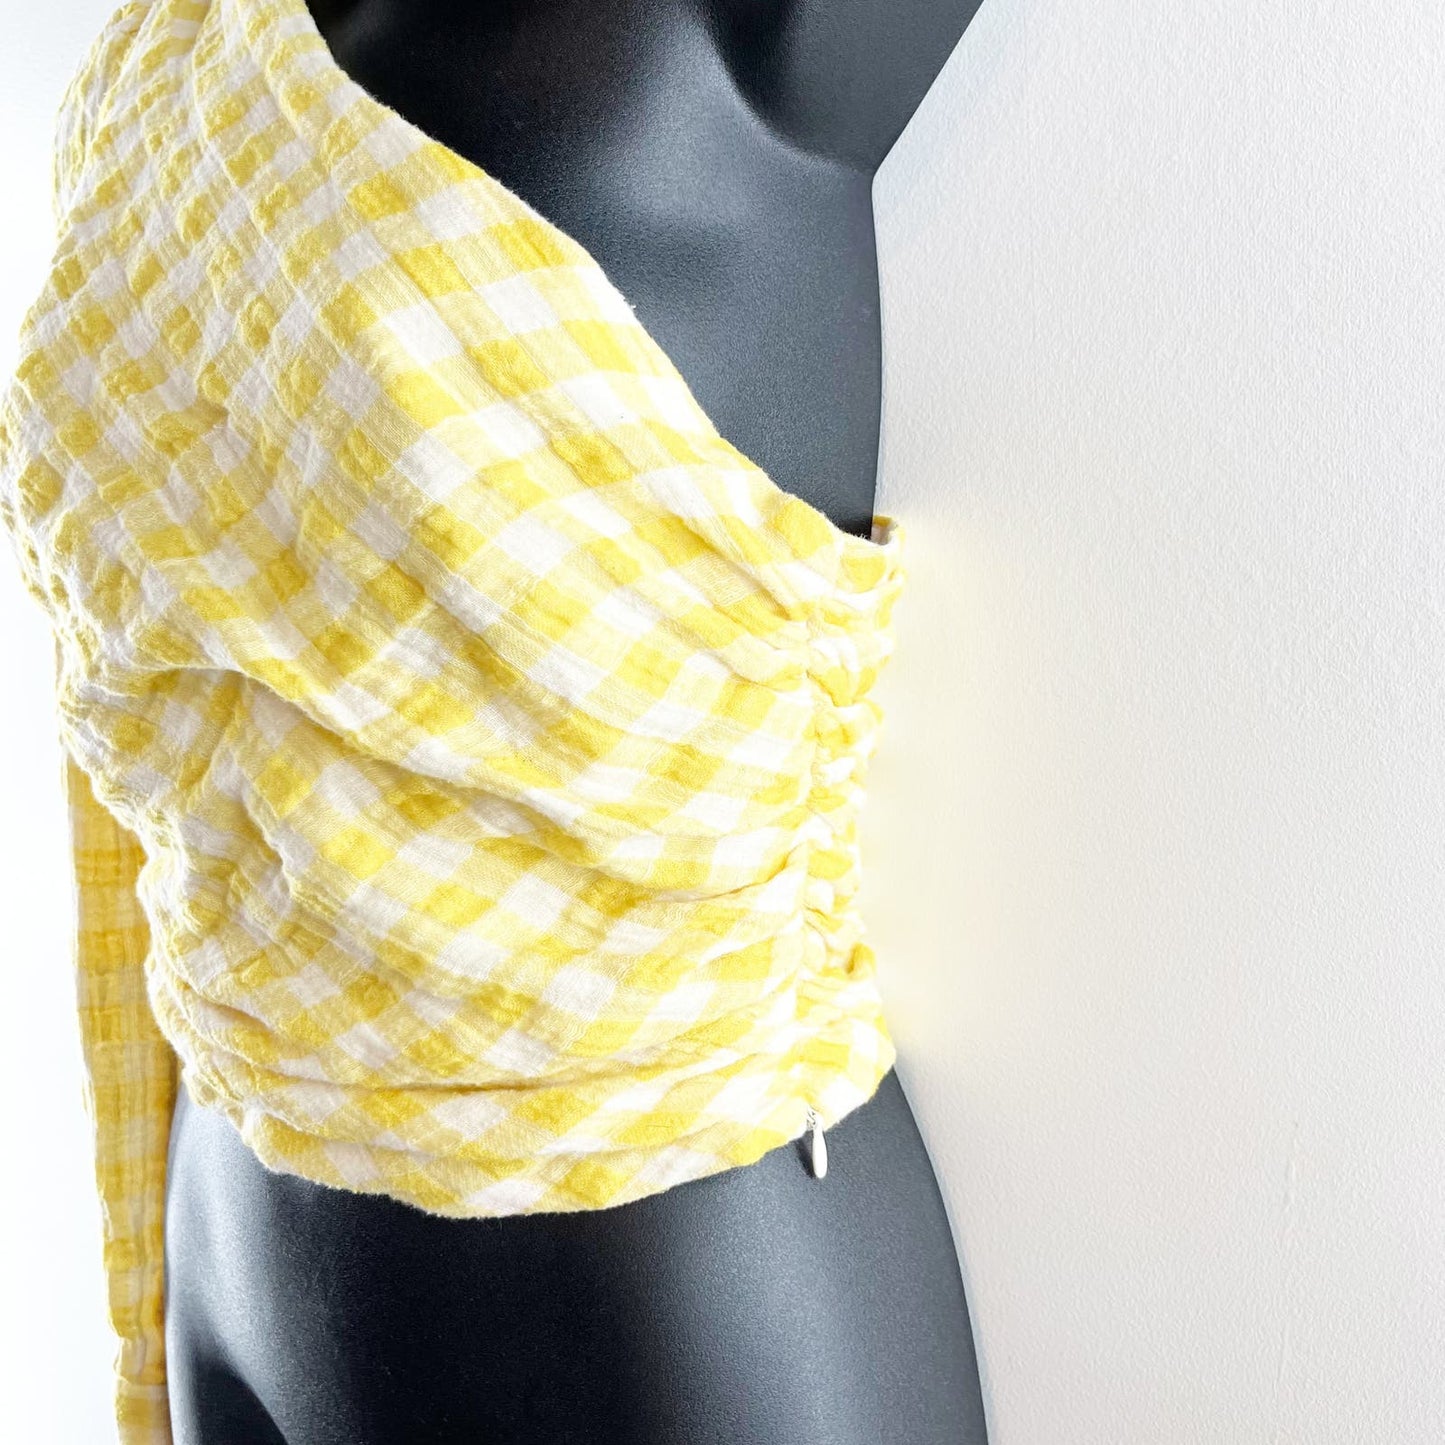 ZARA One Shoulder Gingham Plaid Cropped Top Butter Yellow Medium